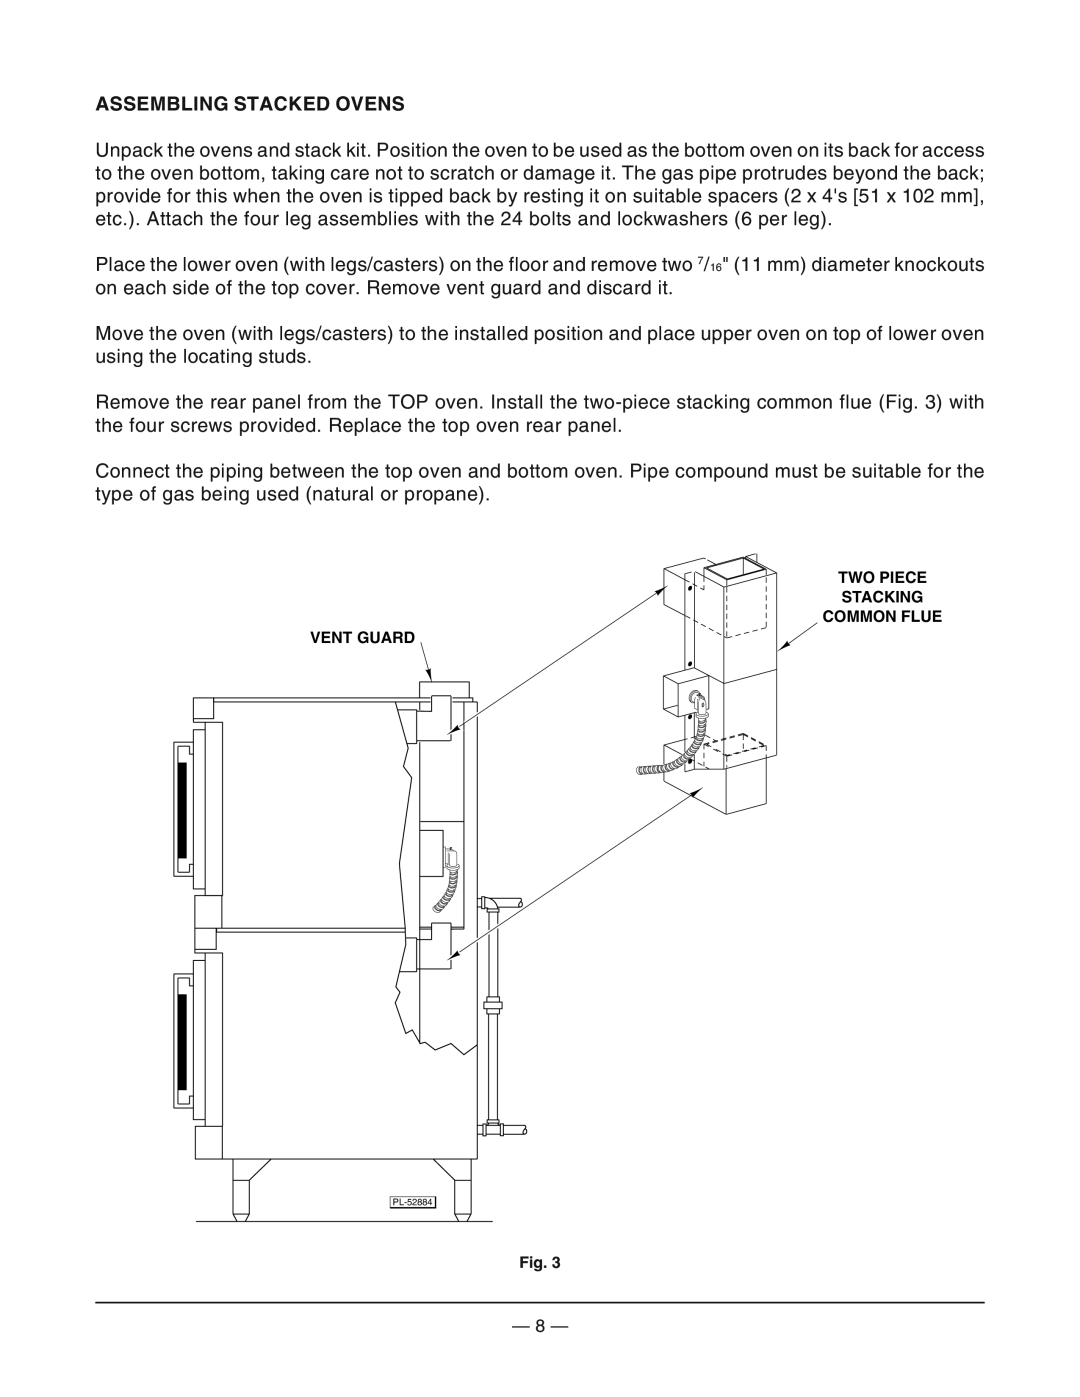 Vulcan-Hart SG4D ML-114875, SG6D ML-114877, SG6C ML-114878, SG4C ML-114876 operation manual Assembling Stacked Ovens 